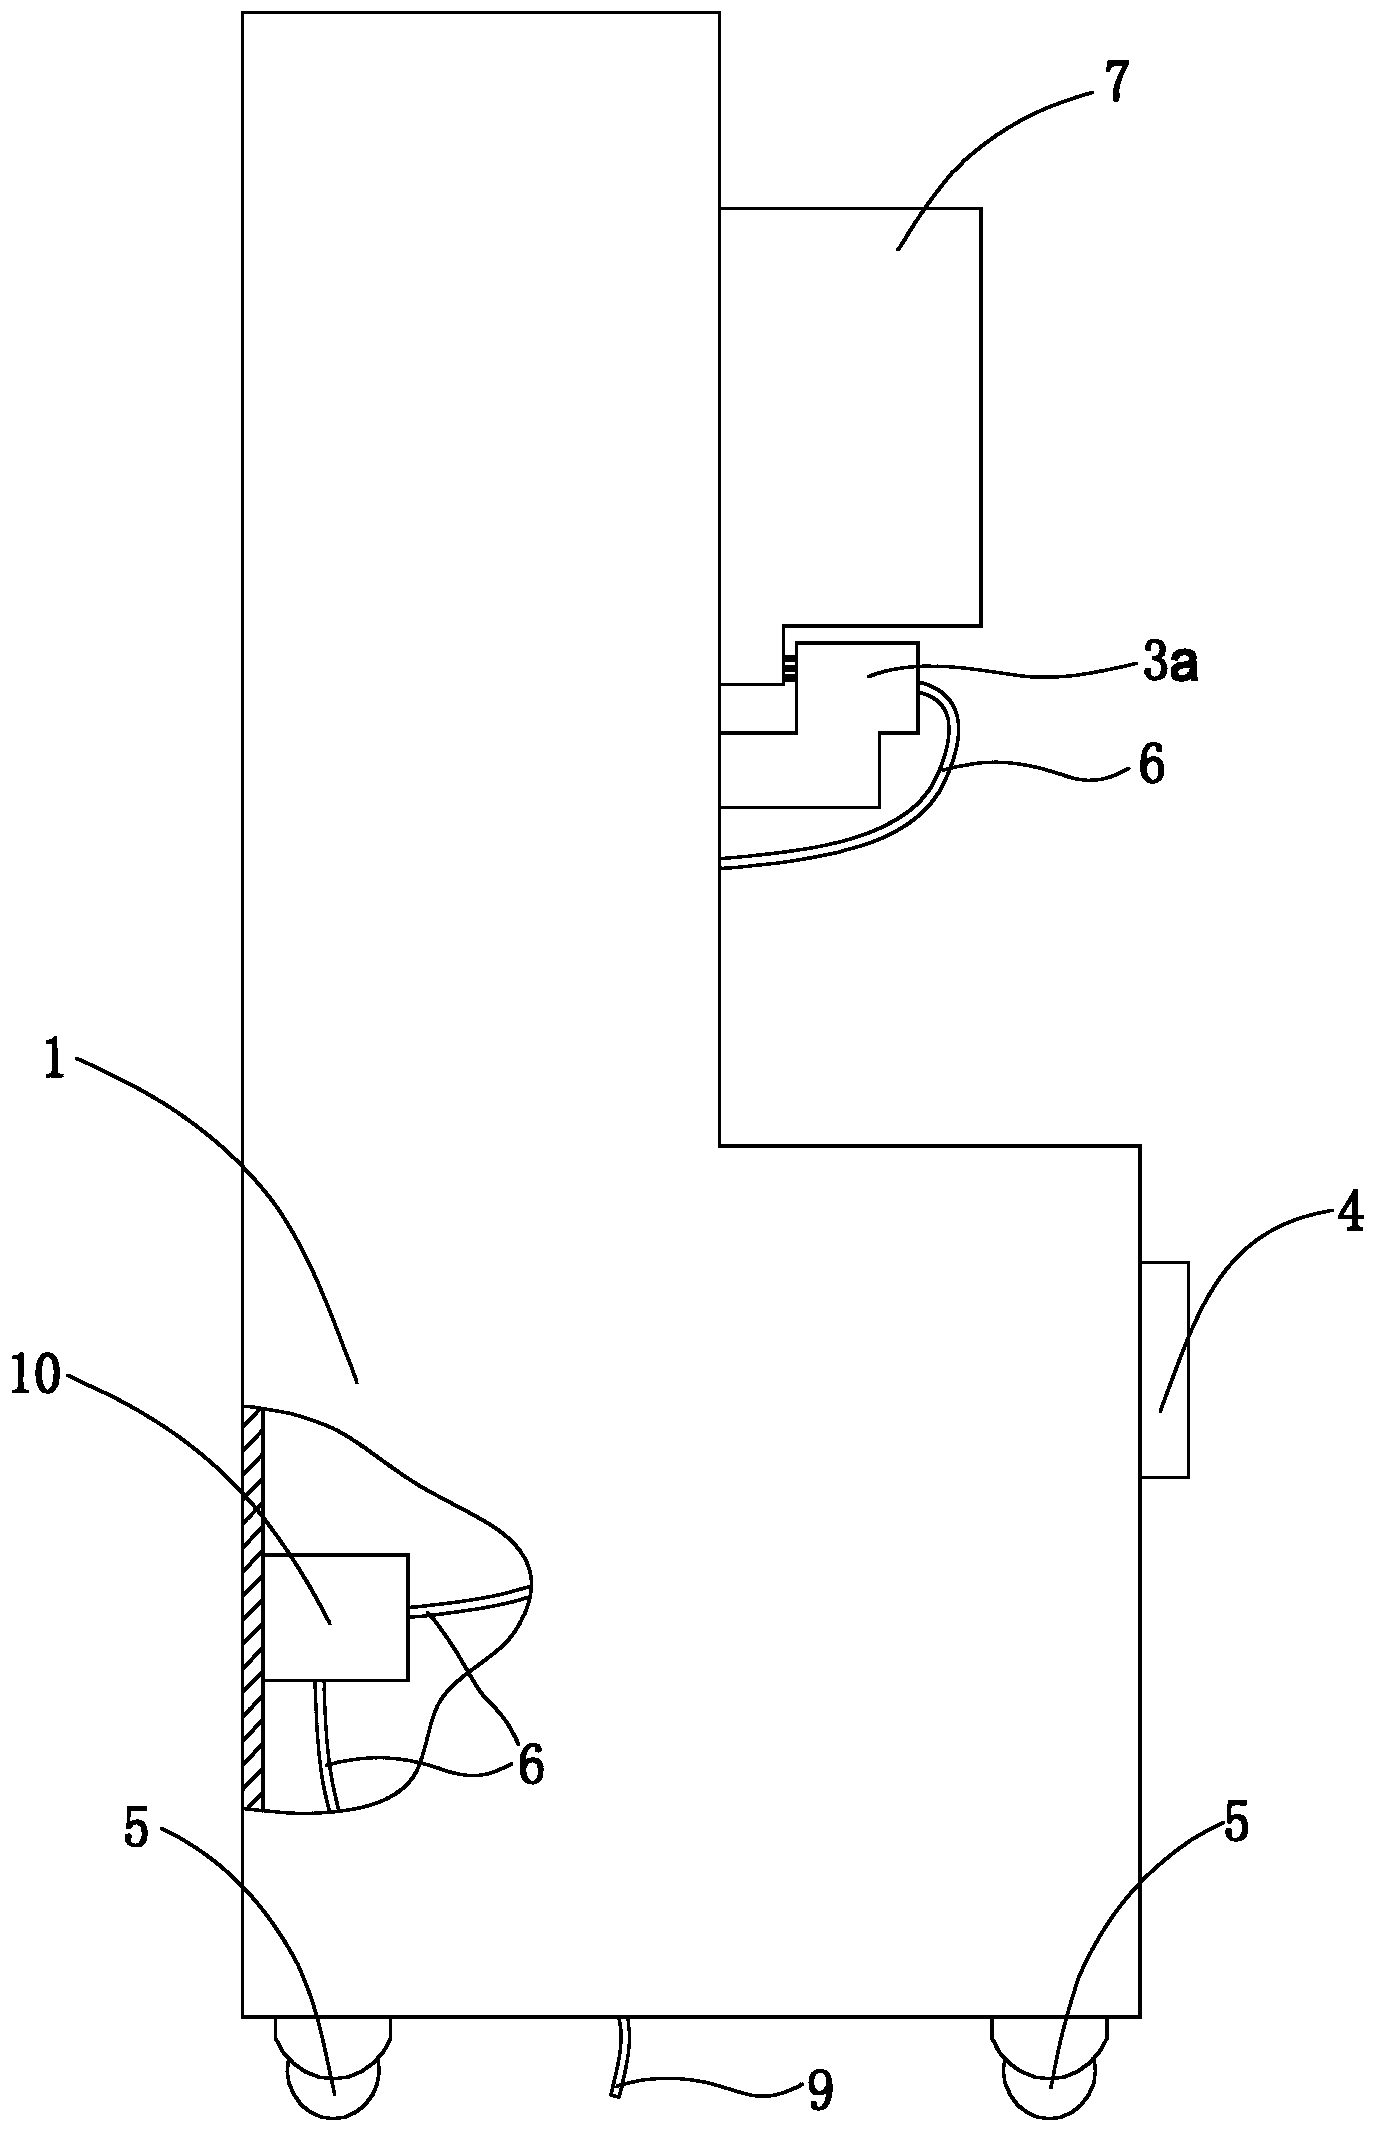 Debugging device applied to pairing of negative control terminal and ammeter